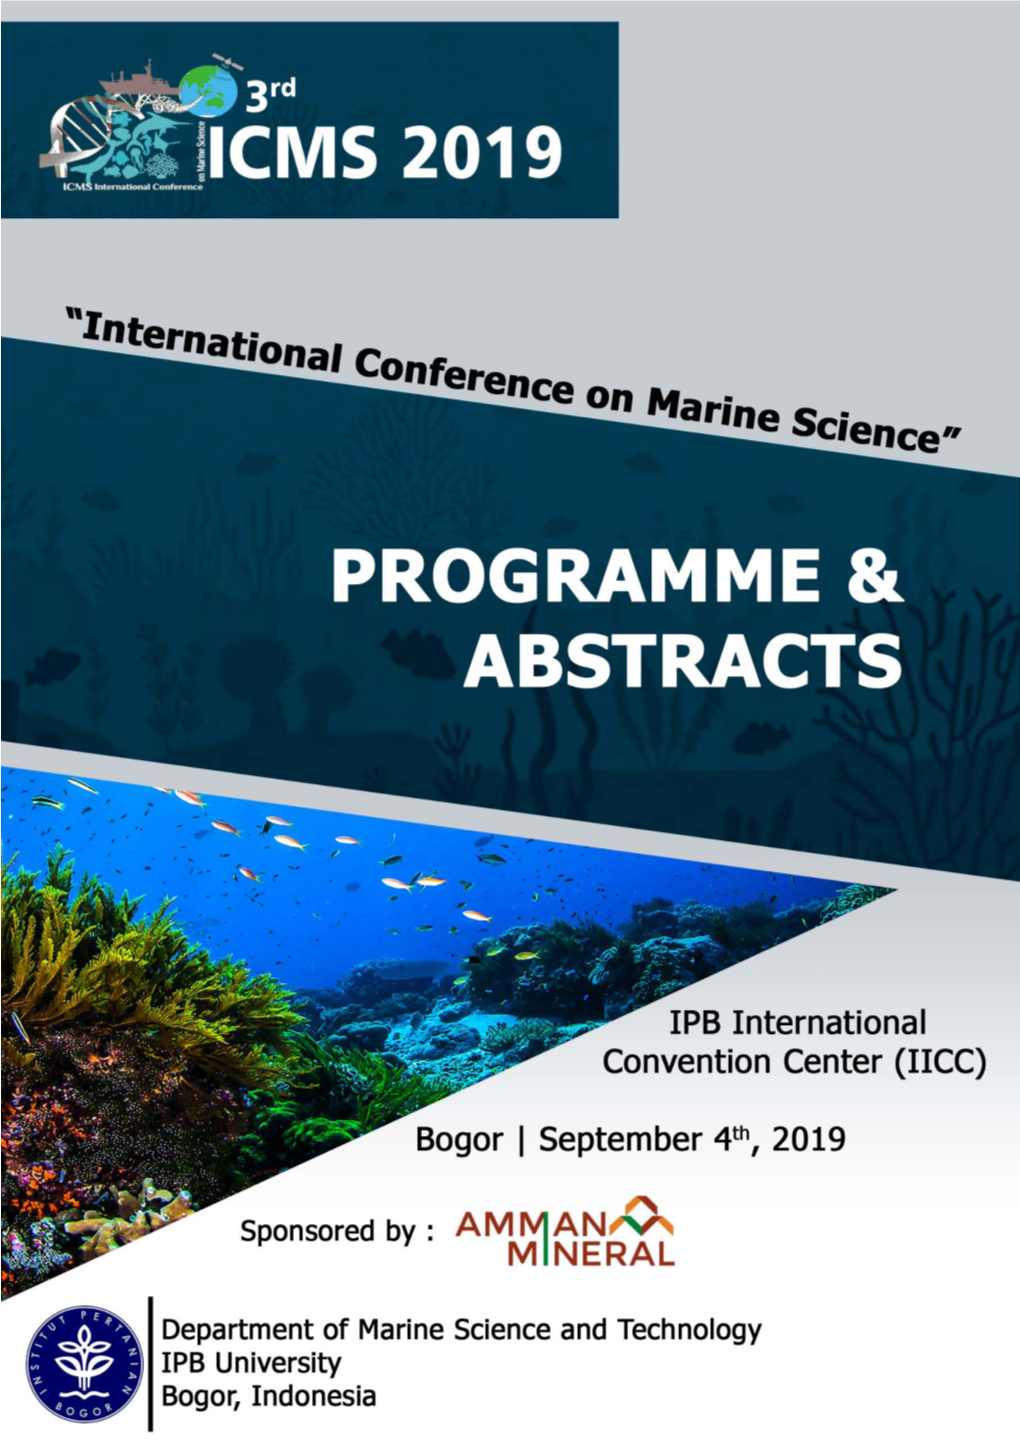 INTERATIONAL CONFERENCE on MARINE SCIENCE “Toward Sustainable Marine Resources and Environment”